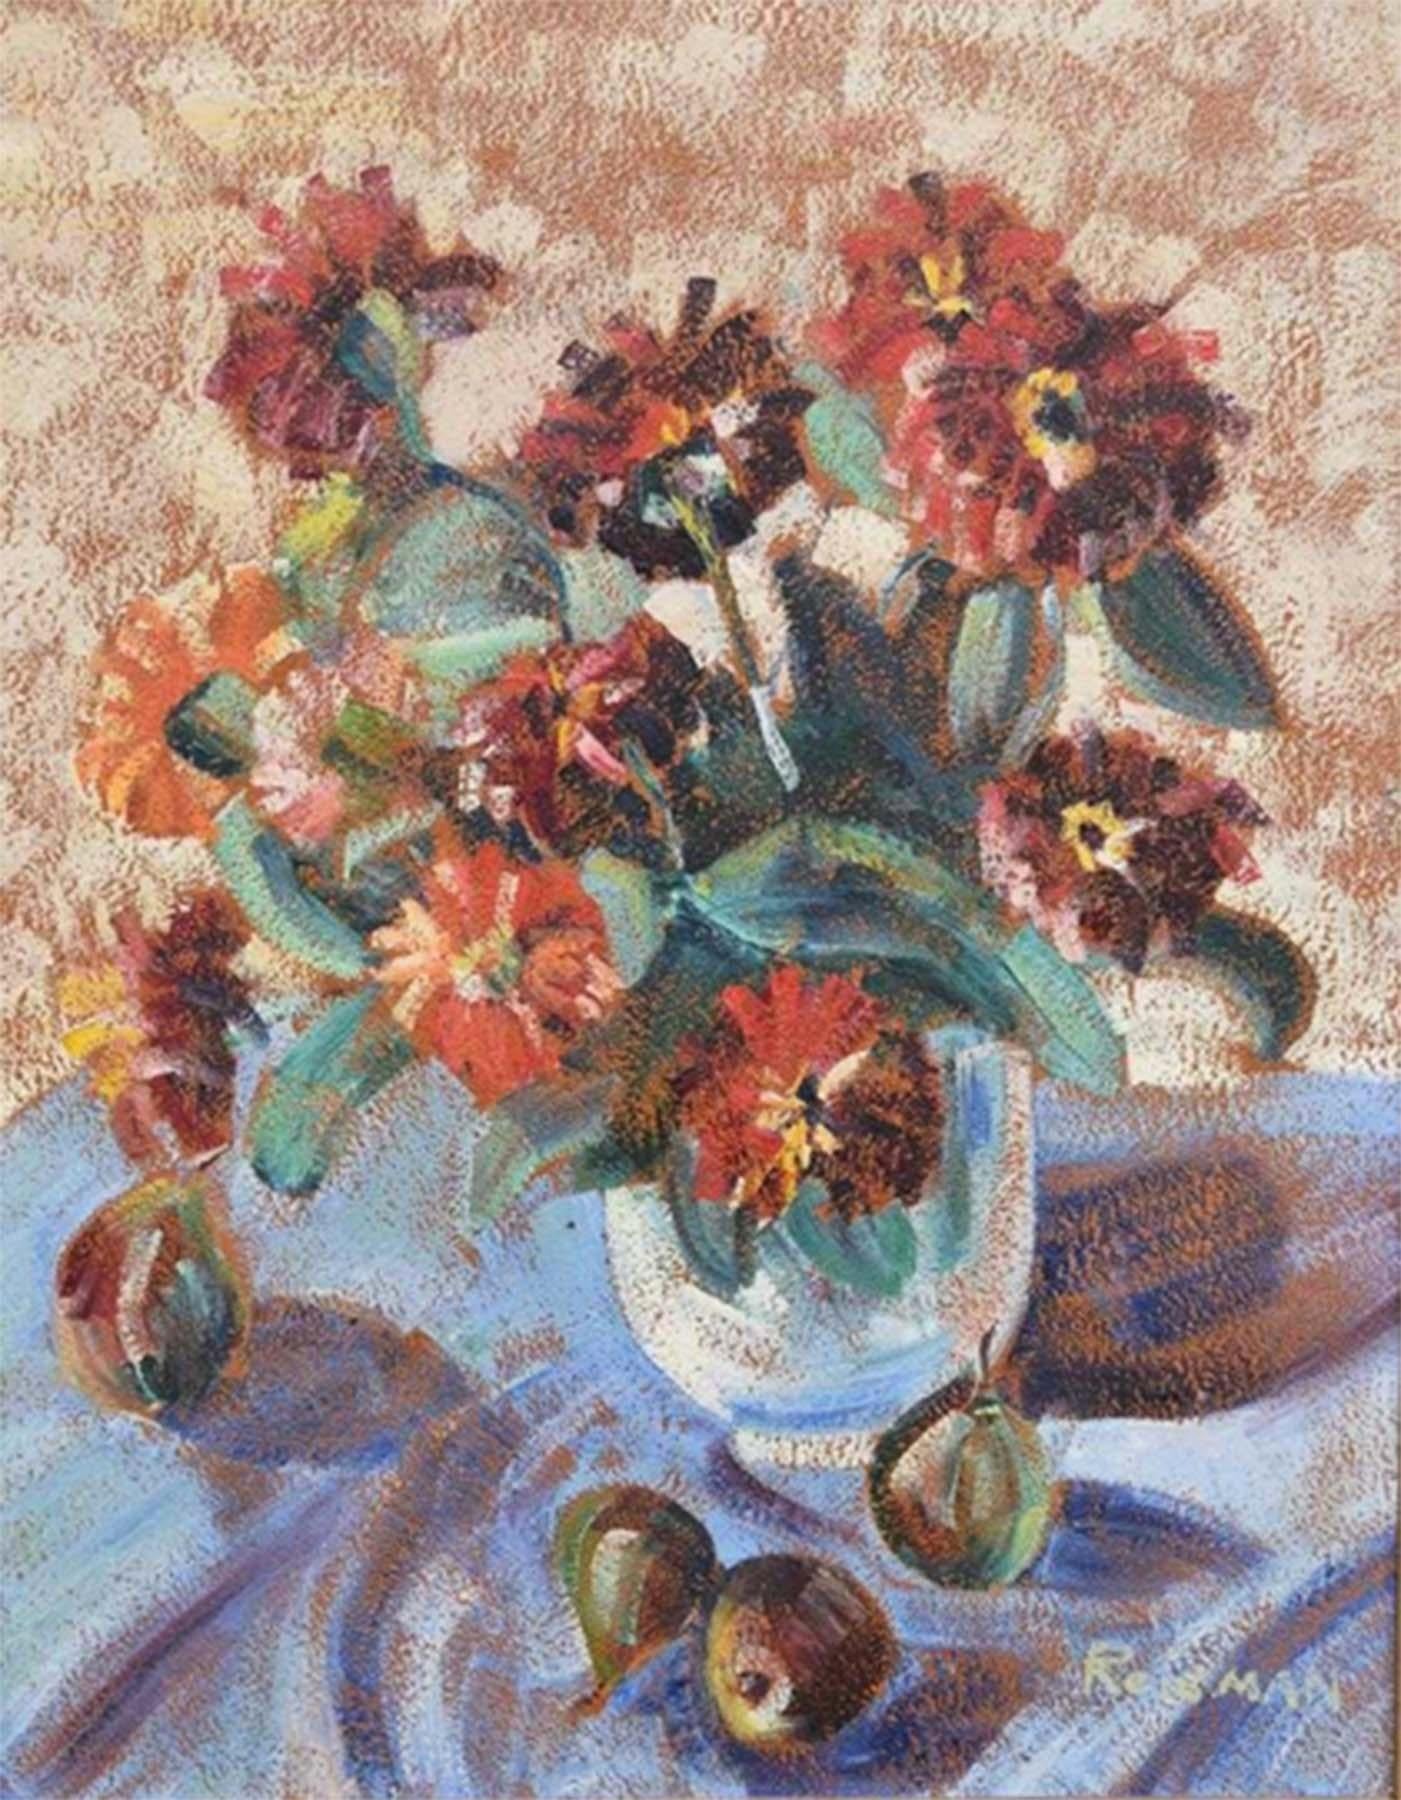 STILL LIFE WITH FROWERS